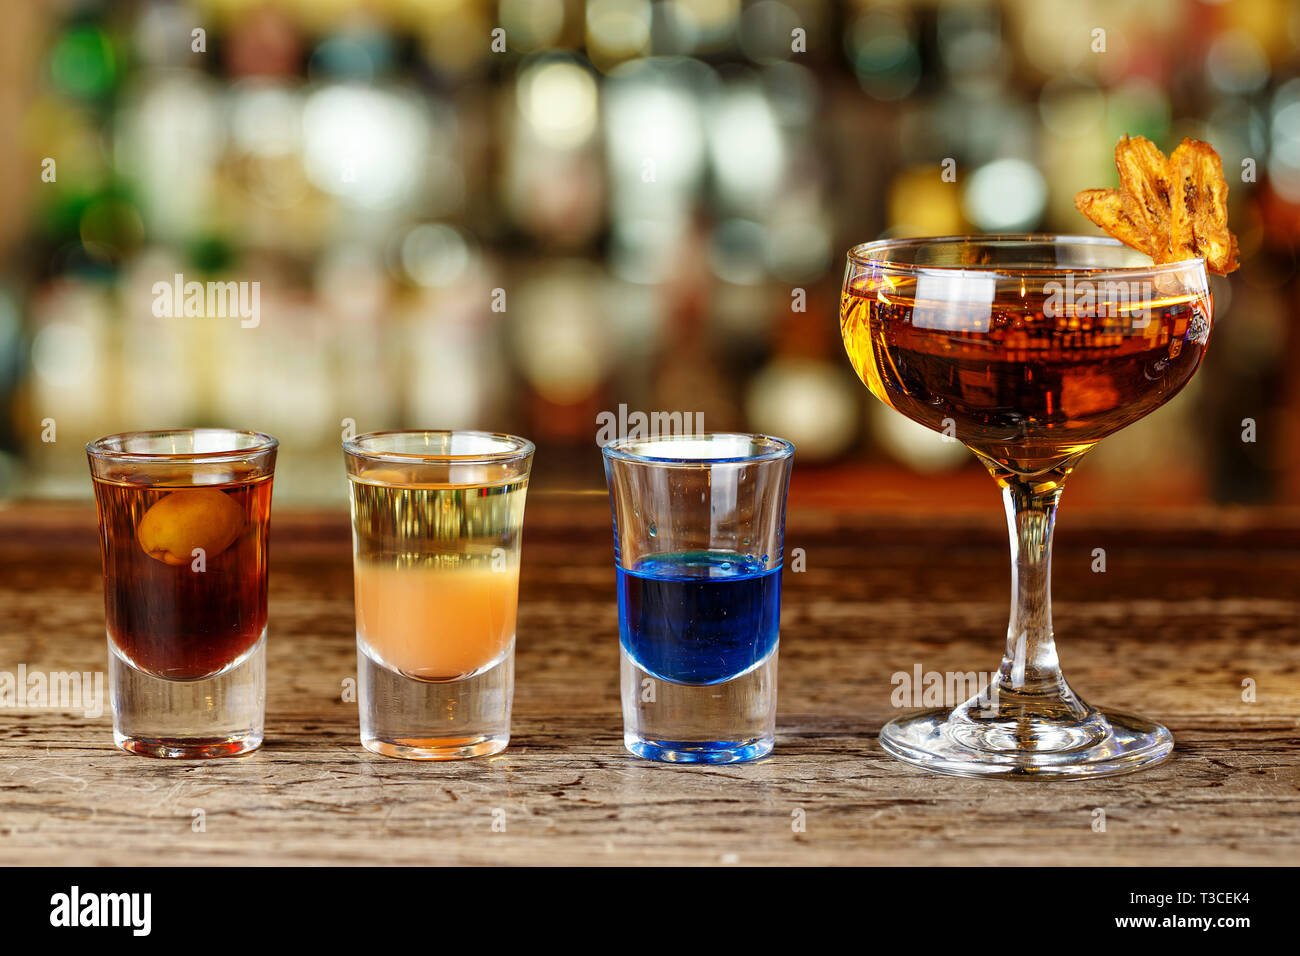 https://c8.alamy.com/comp/T3CEK4/a-cocktail-party-in-a-nightclub-many-drinks-stand-in-a-row-on-the-bar-T3CEK4.jpg